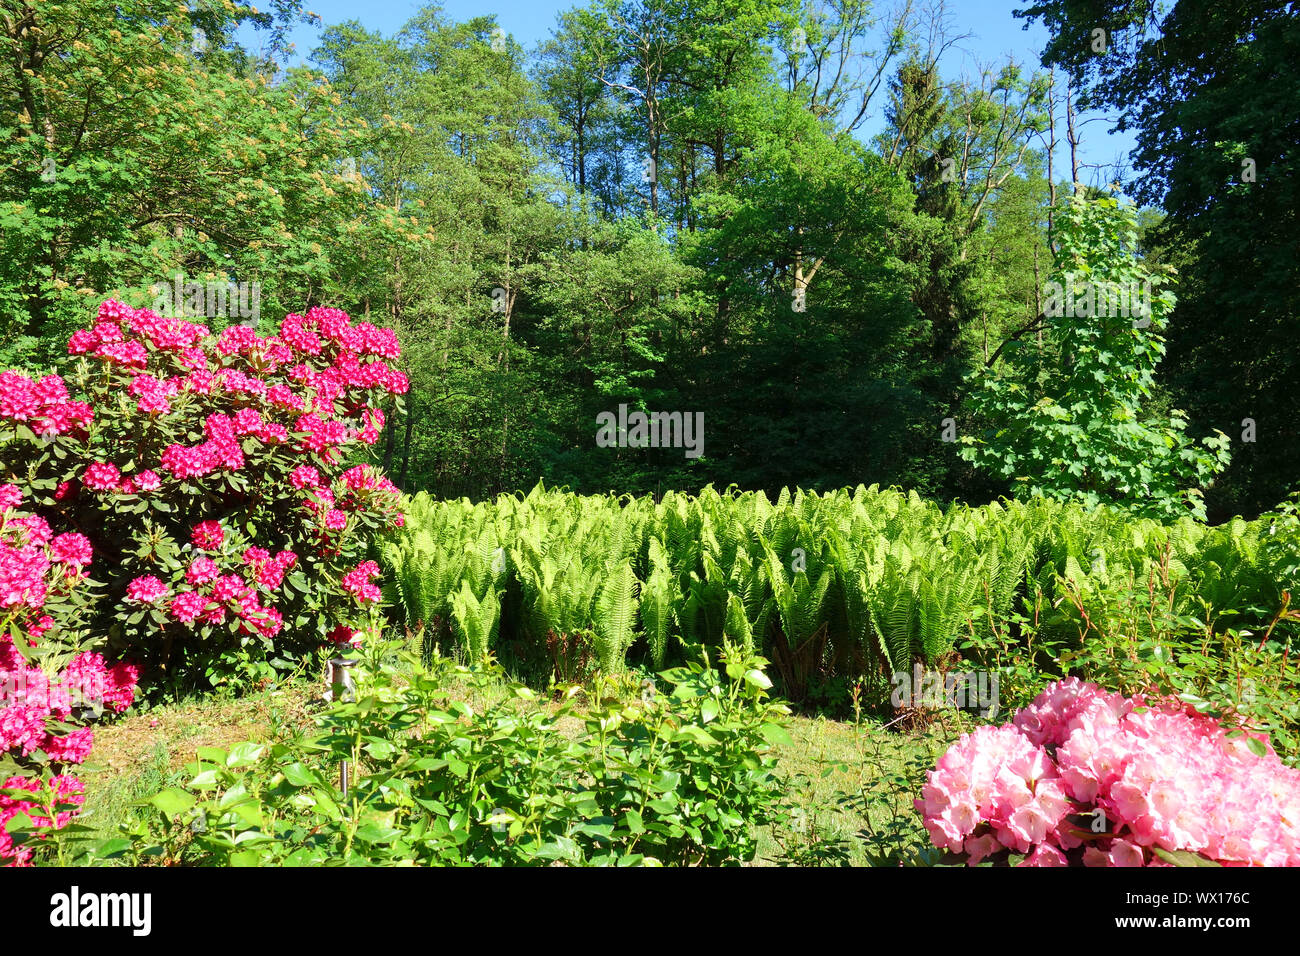 Rhododendrons and ferns in a landscaped garden Stock Photo